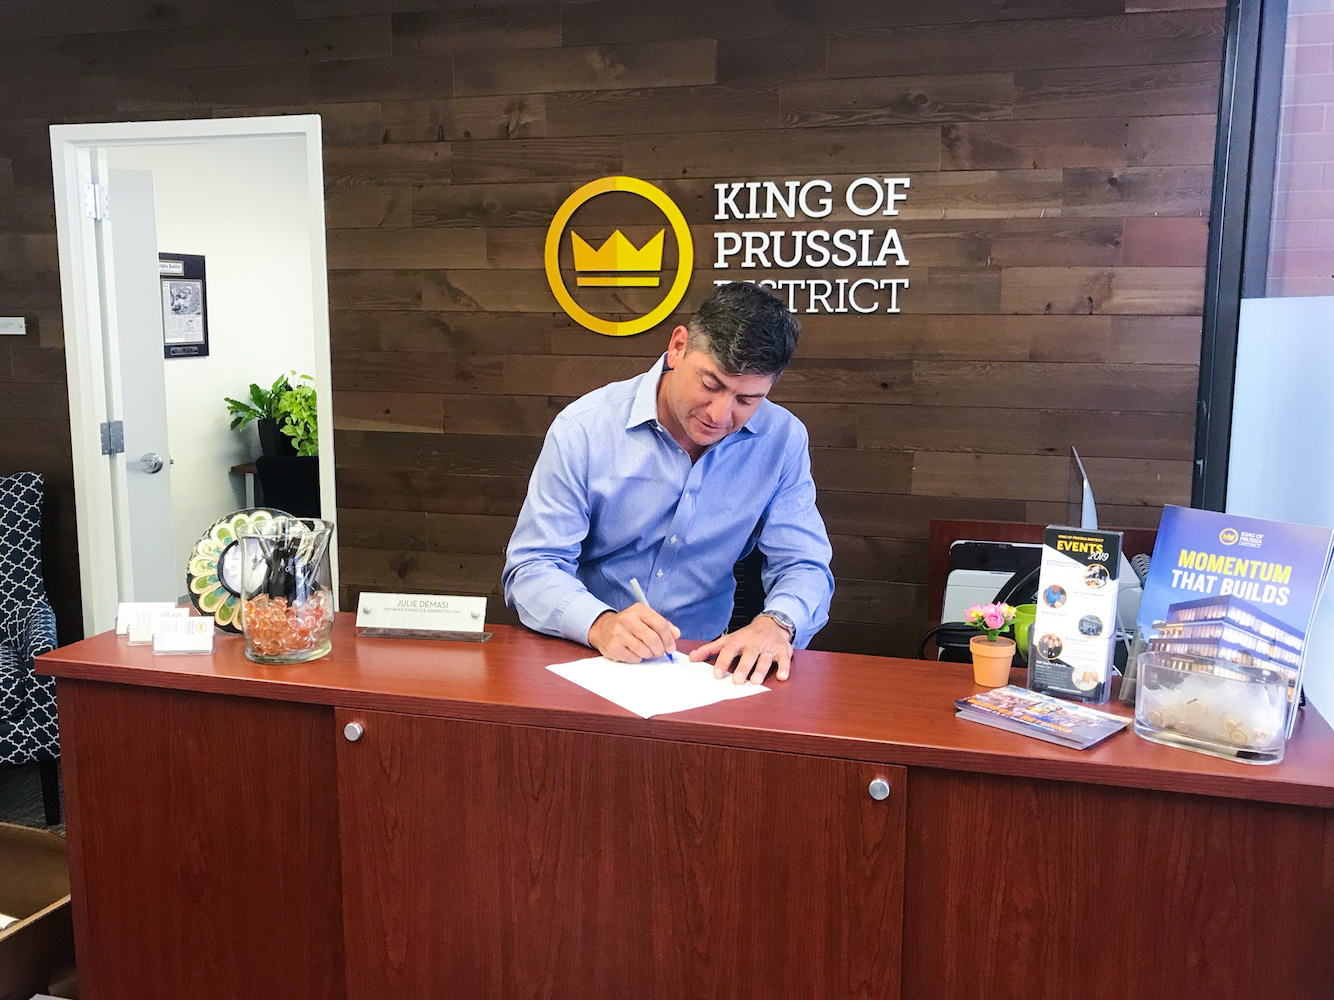 King of Prussia District Executive Director Eric Goldstein signing piece of paper on desk